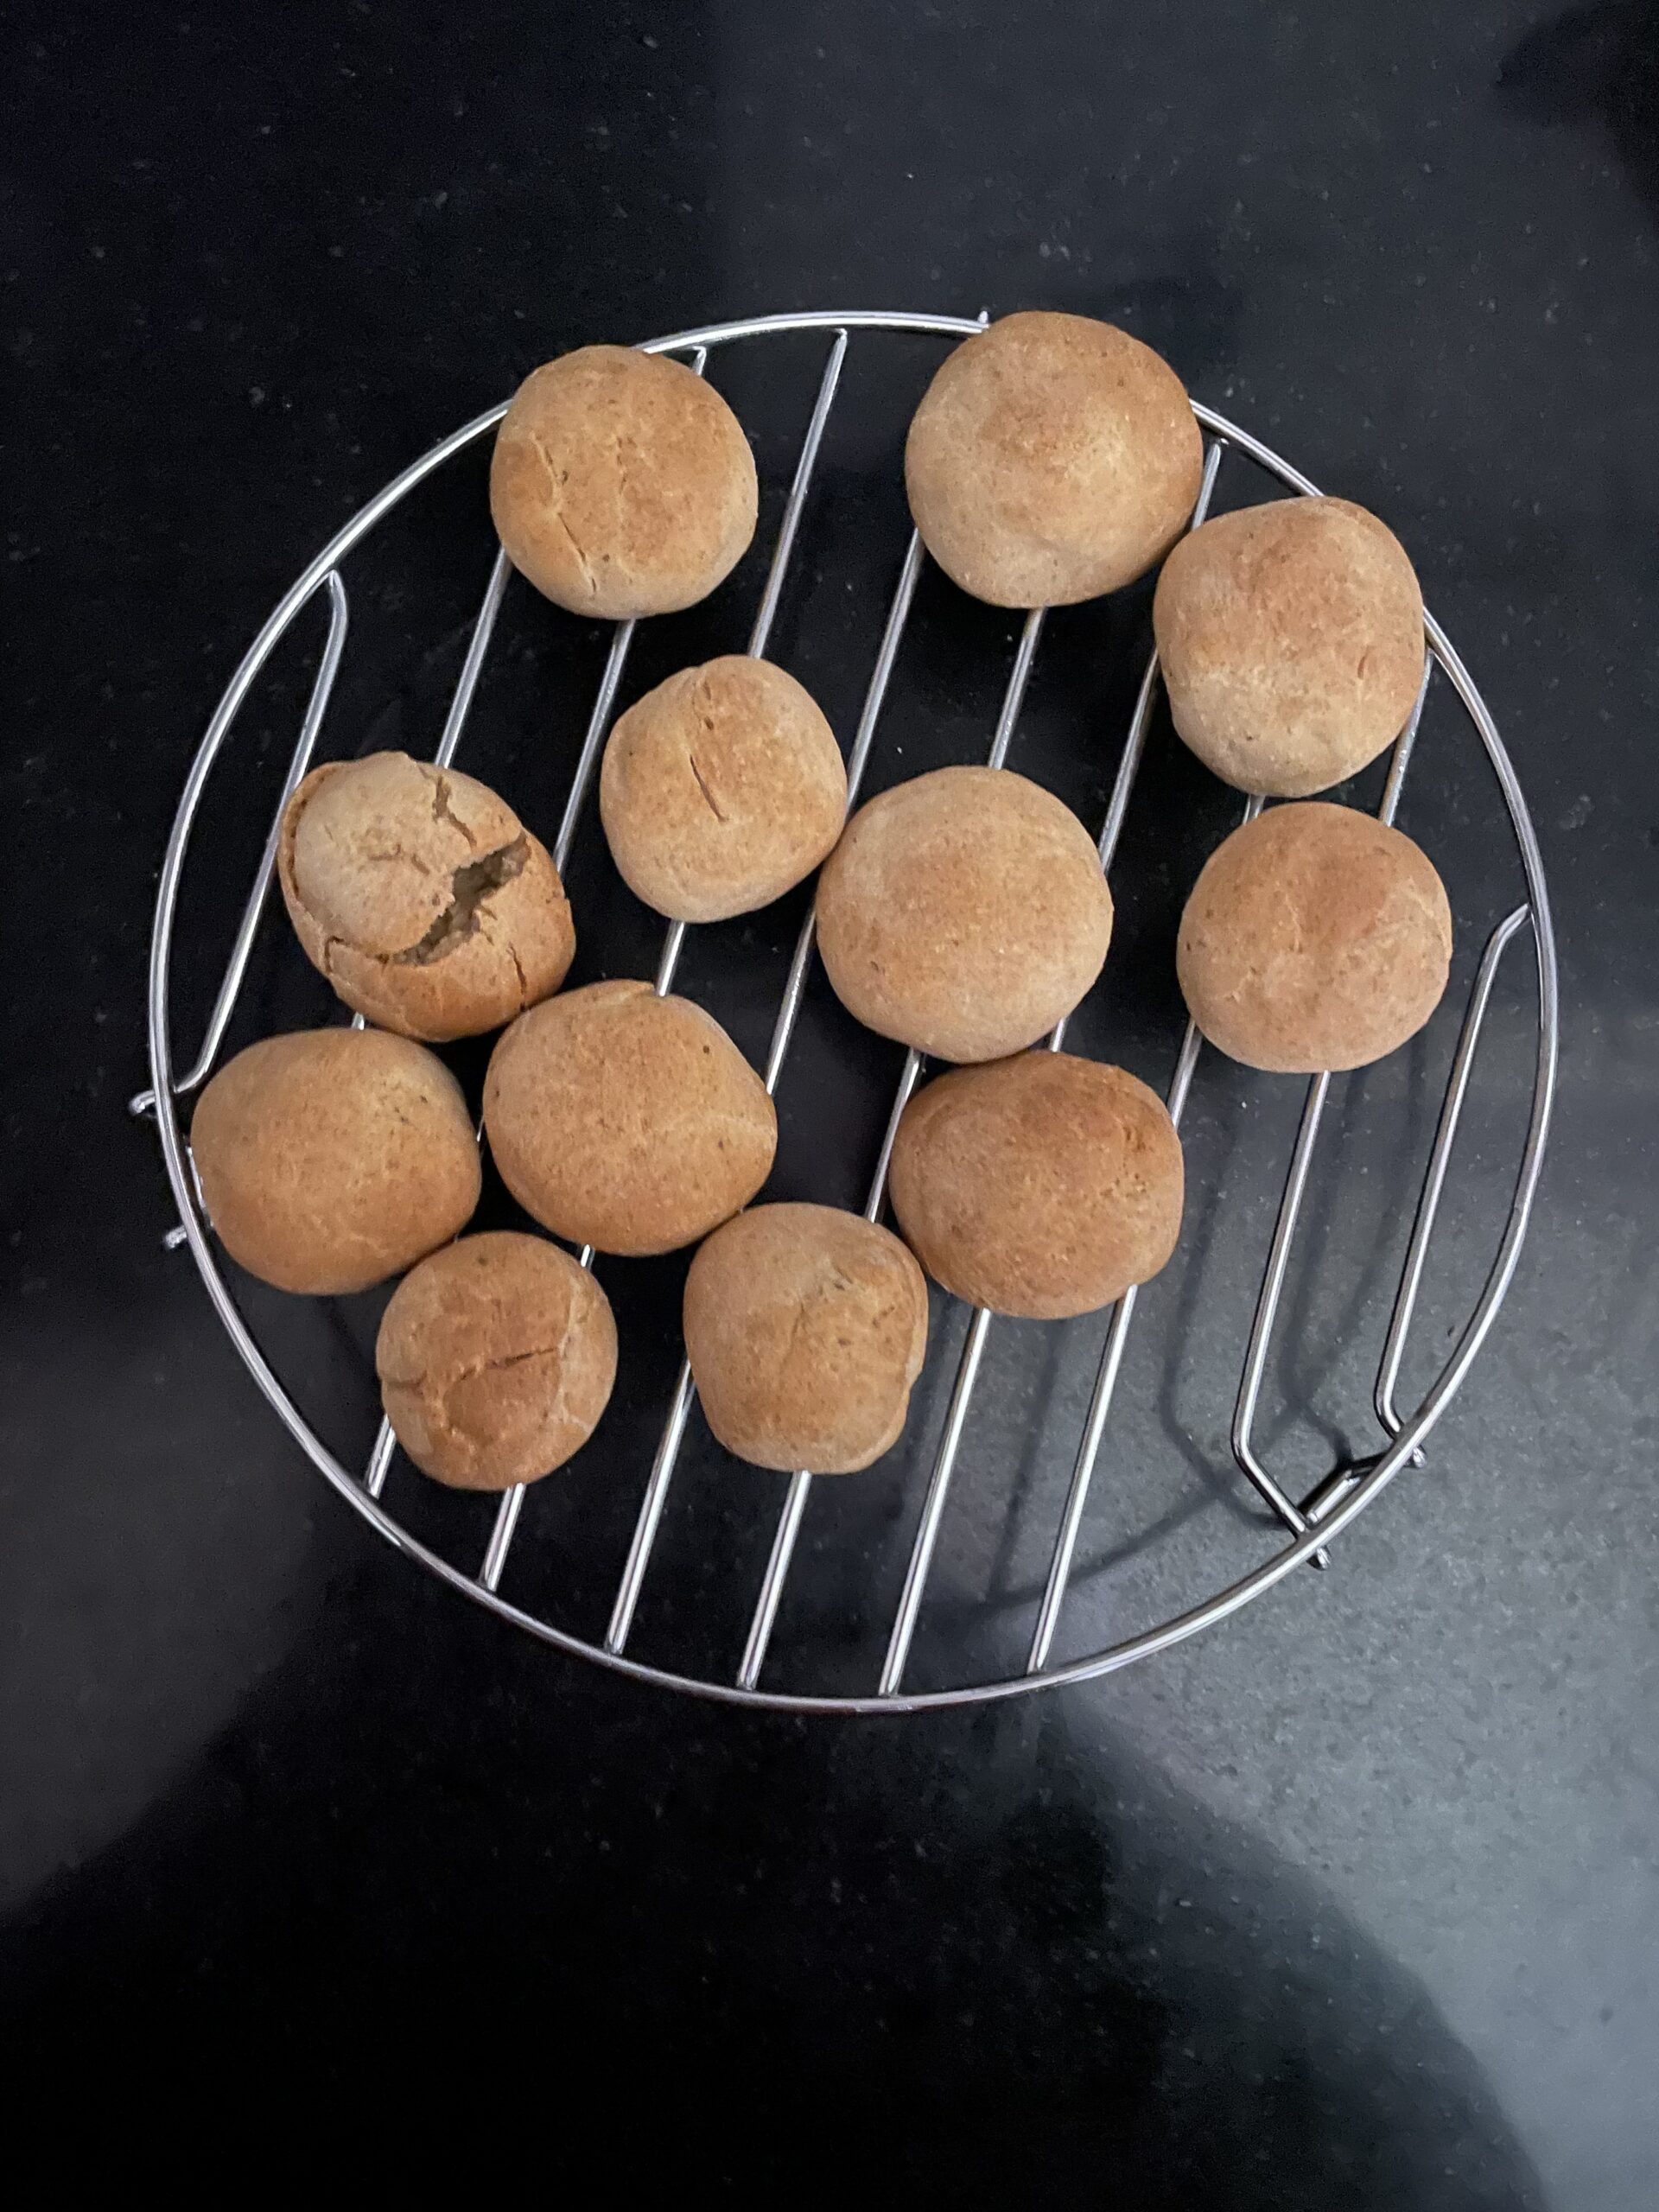 How to cook baati in convection mode in oven ?